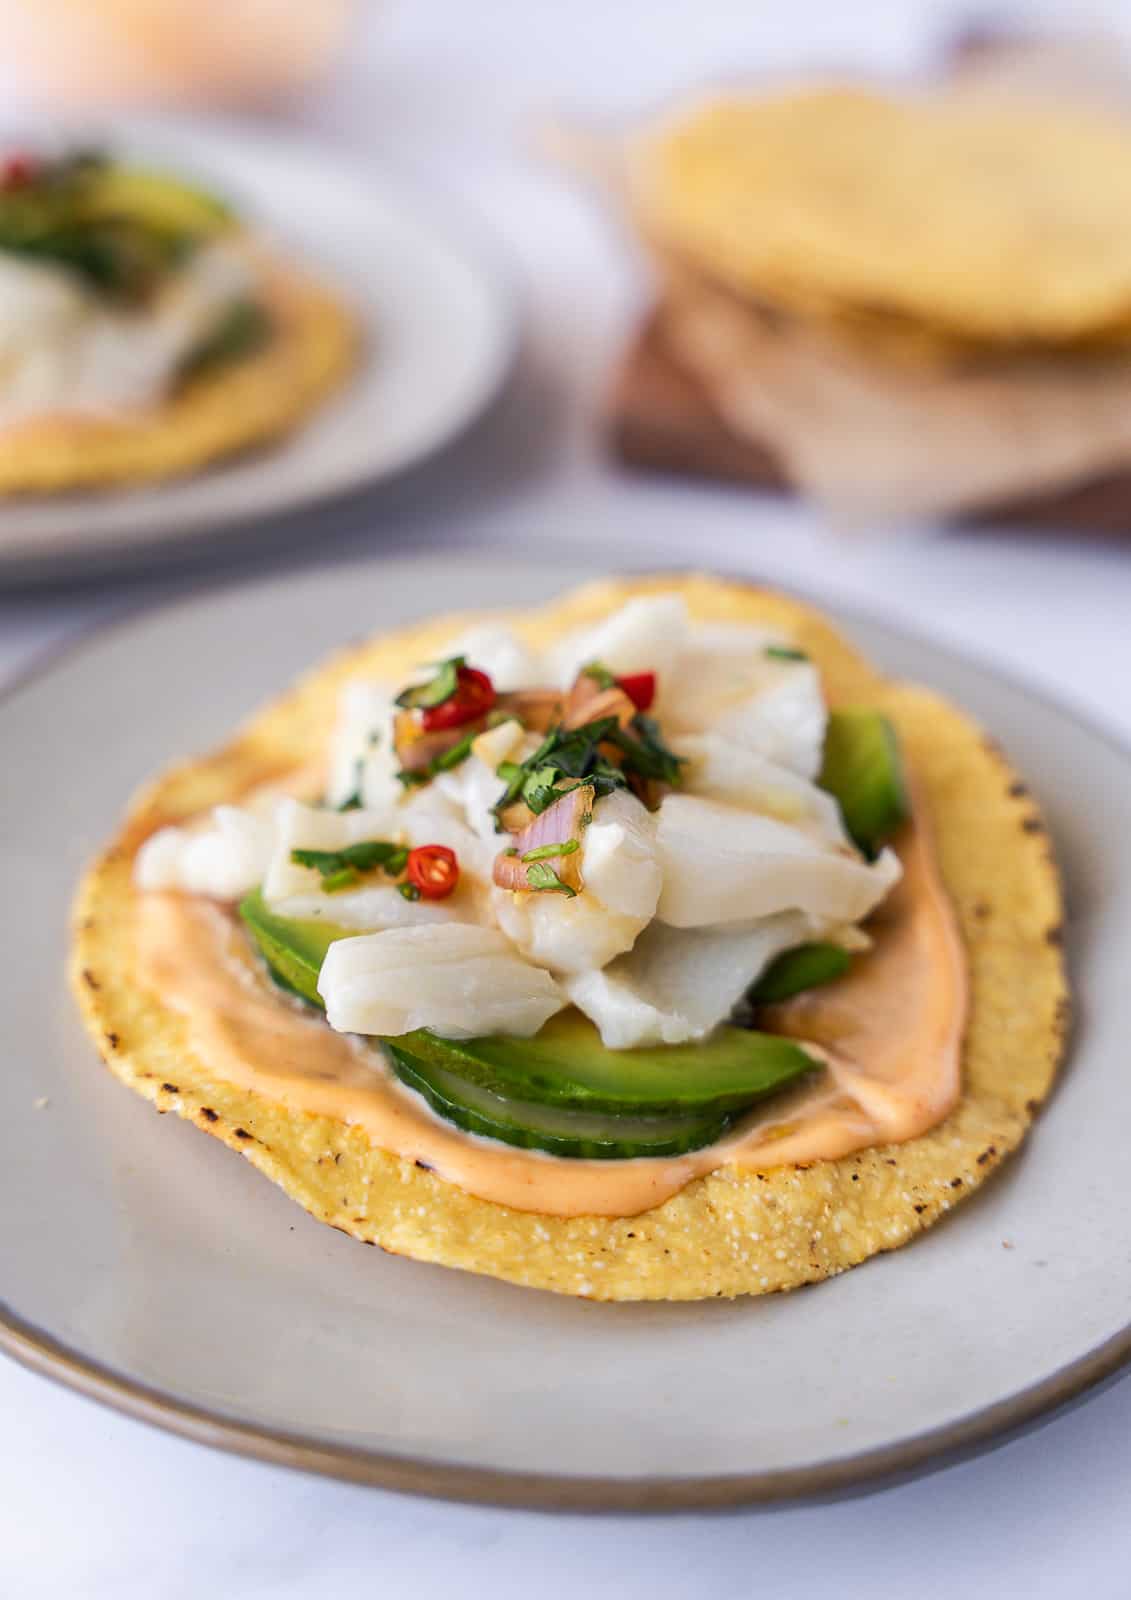 One assembled ceviche tostada on a plate.